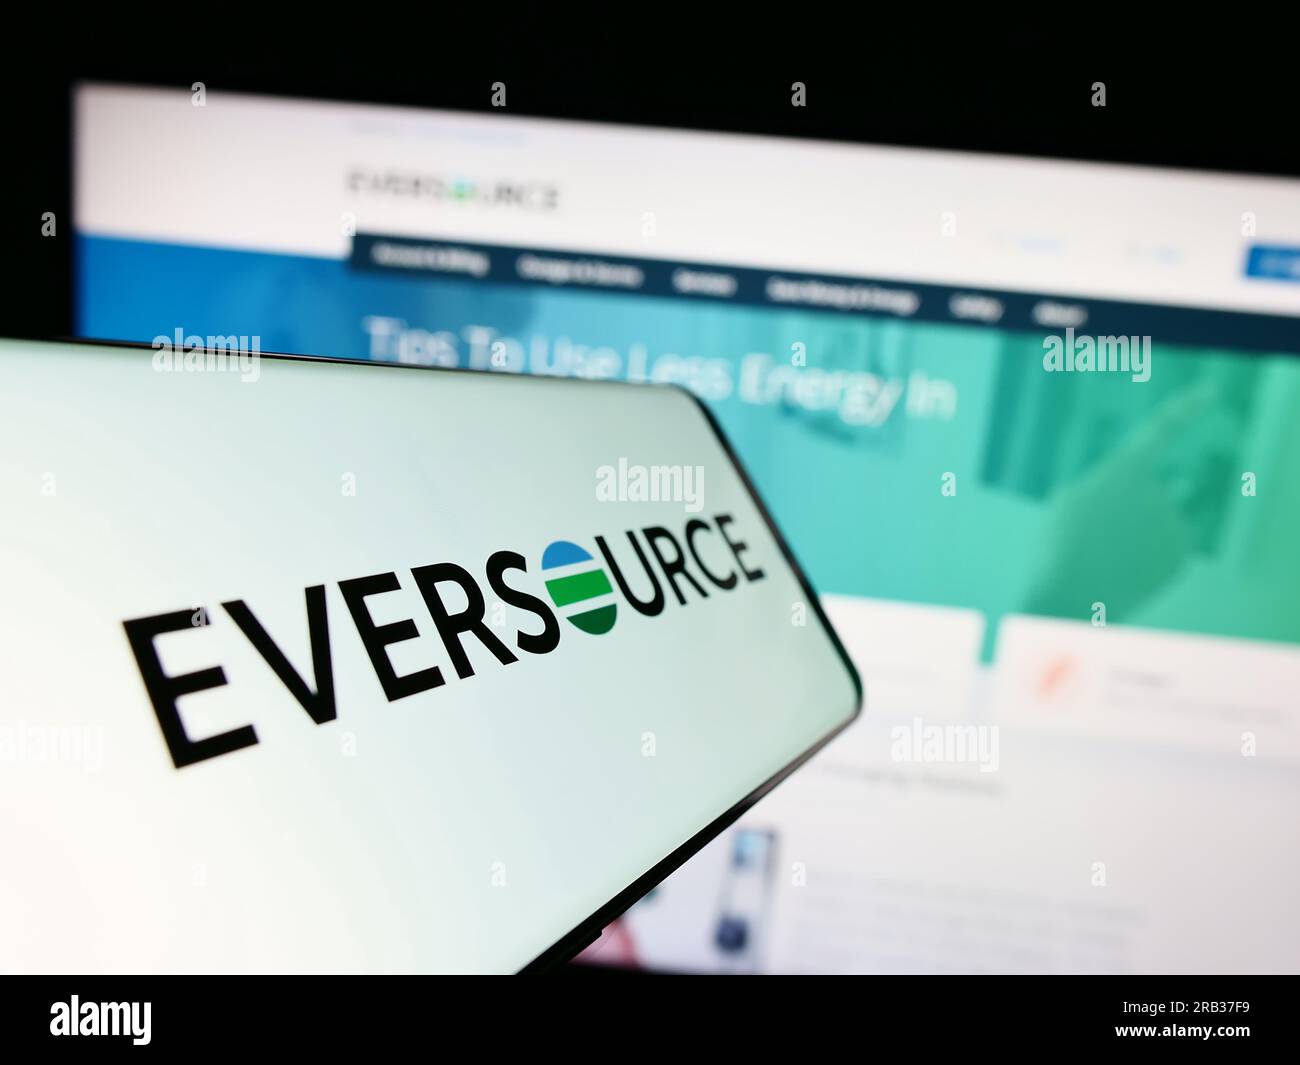 Cellphone with logo of American utility company Eversource Energy on screen in front of website. Focus on center-right of phone display. Stock Photo